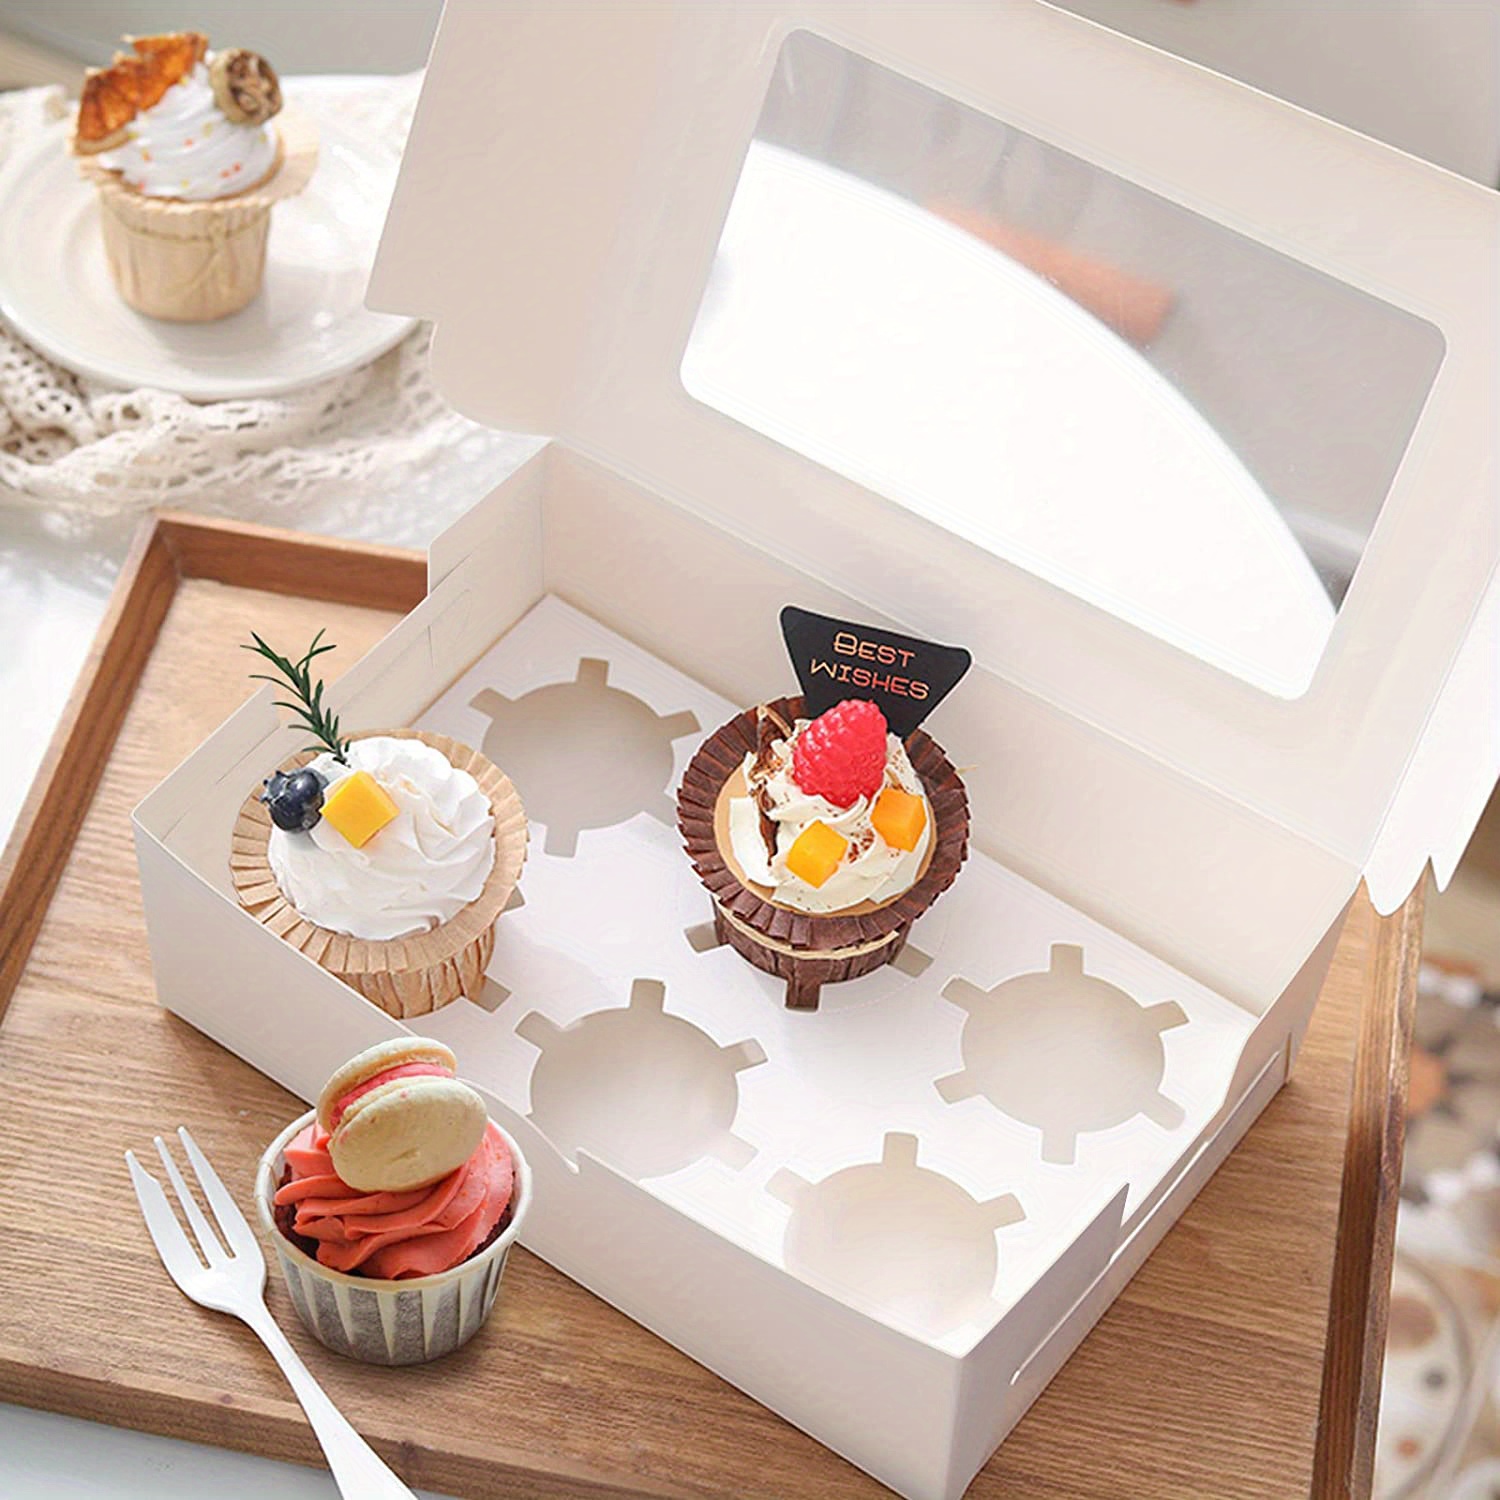 12-Pack, 2.5 Mini Cupcake & Muffin Container